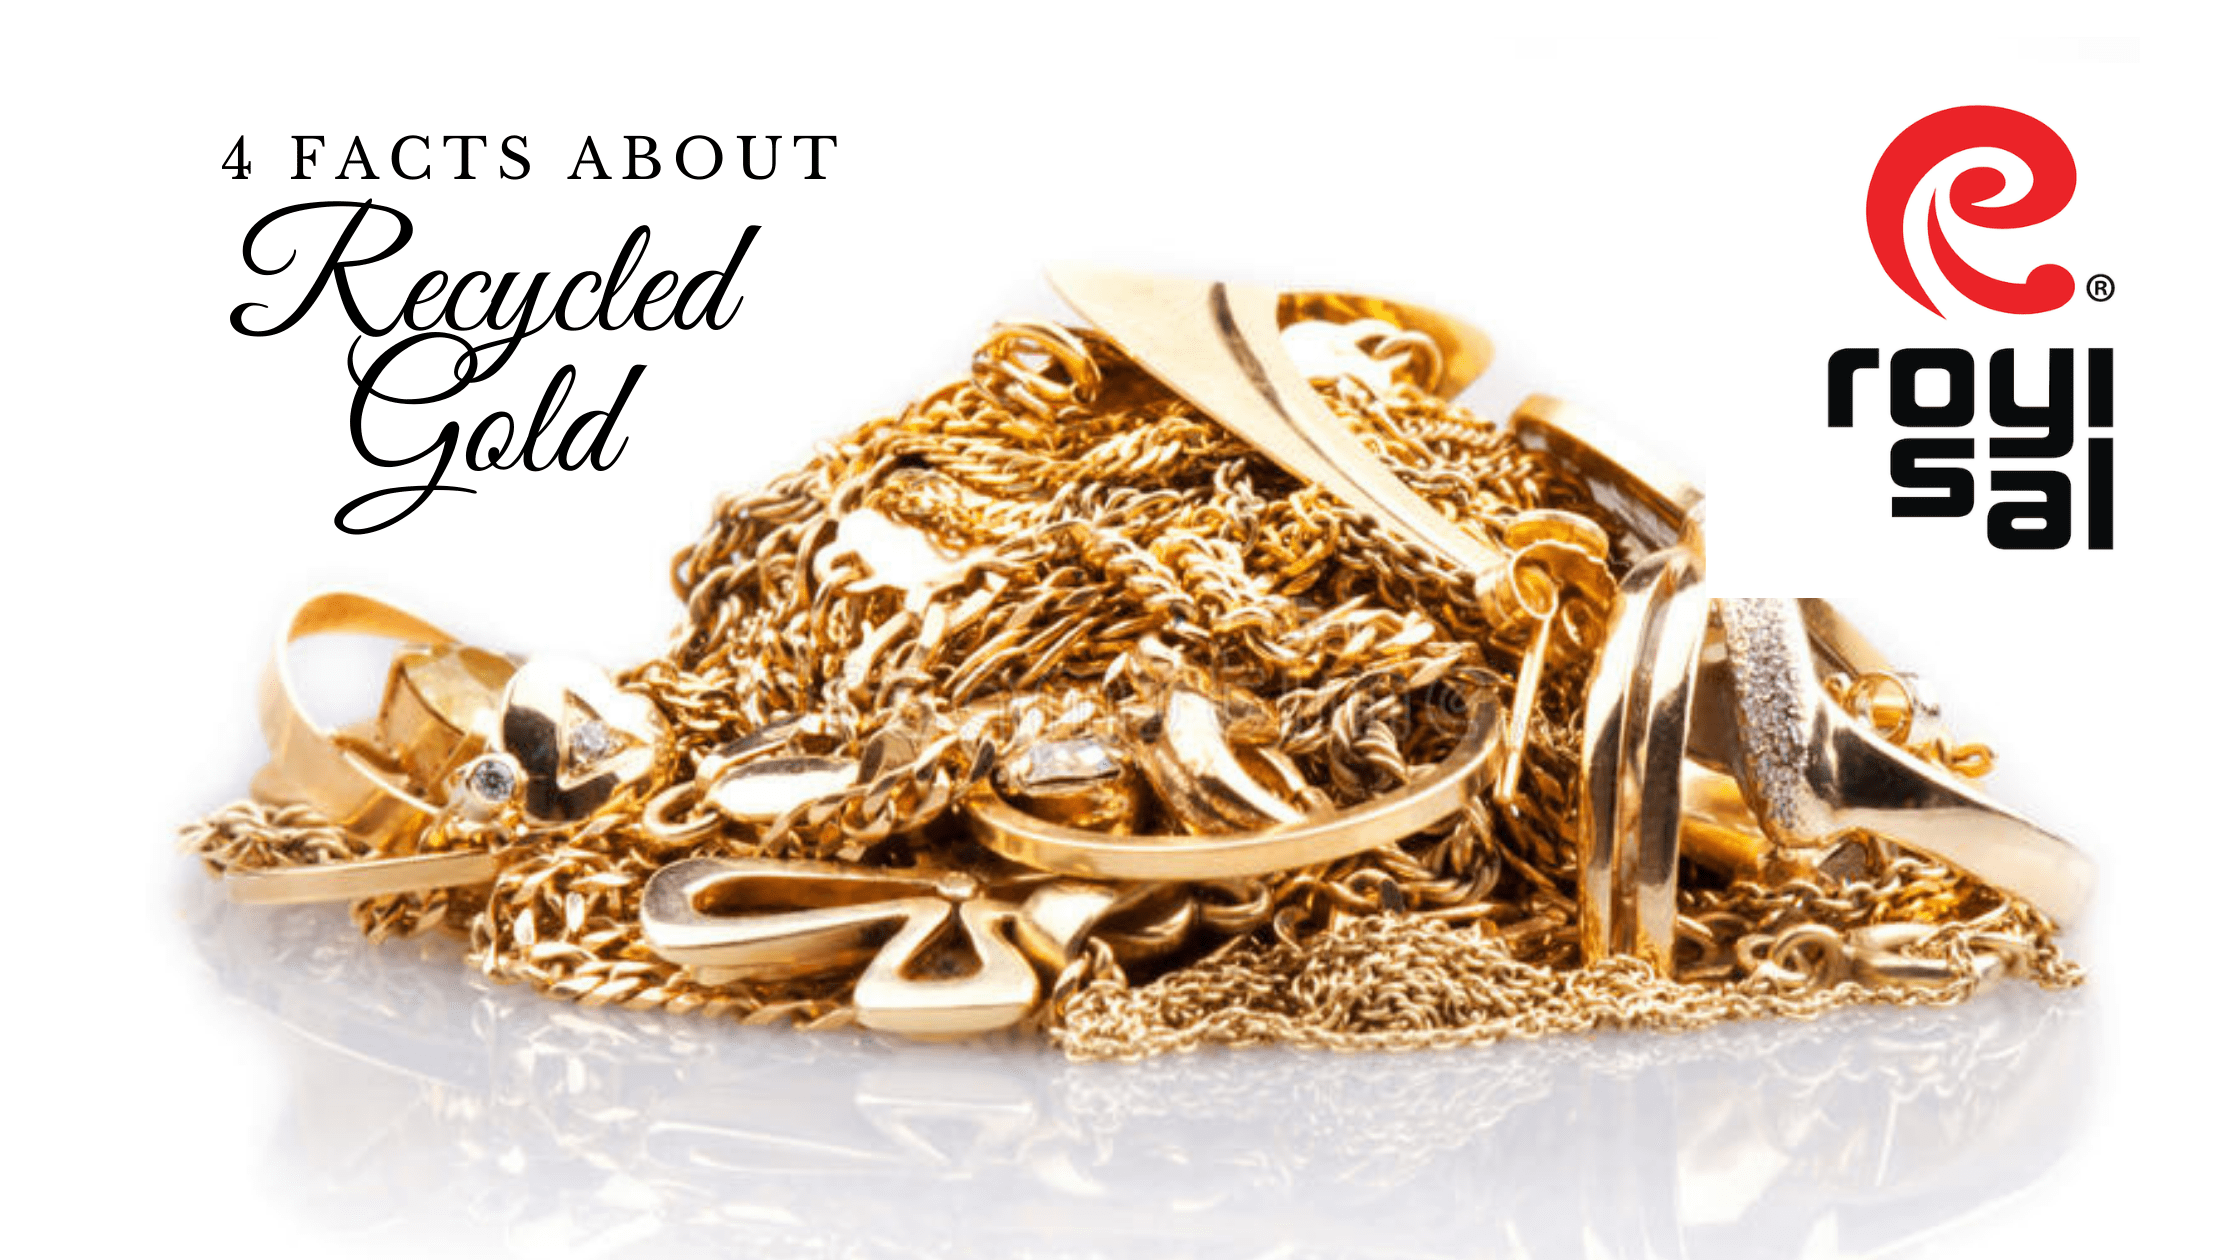 Recycled Gold—How Responsible Is It? (Hint: Not Always) - IMPACT